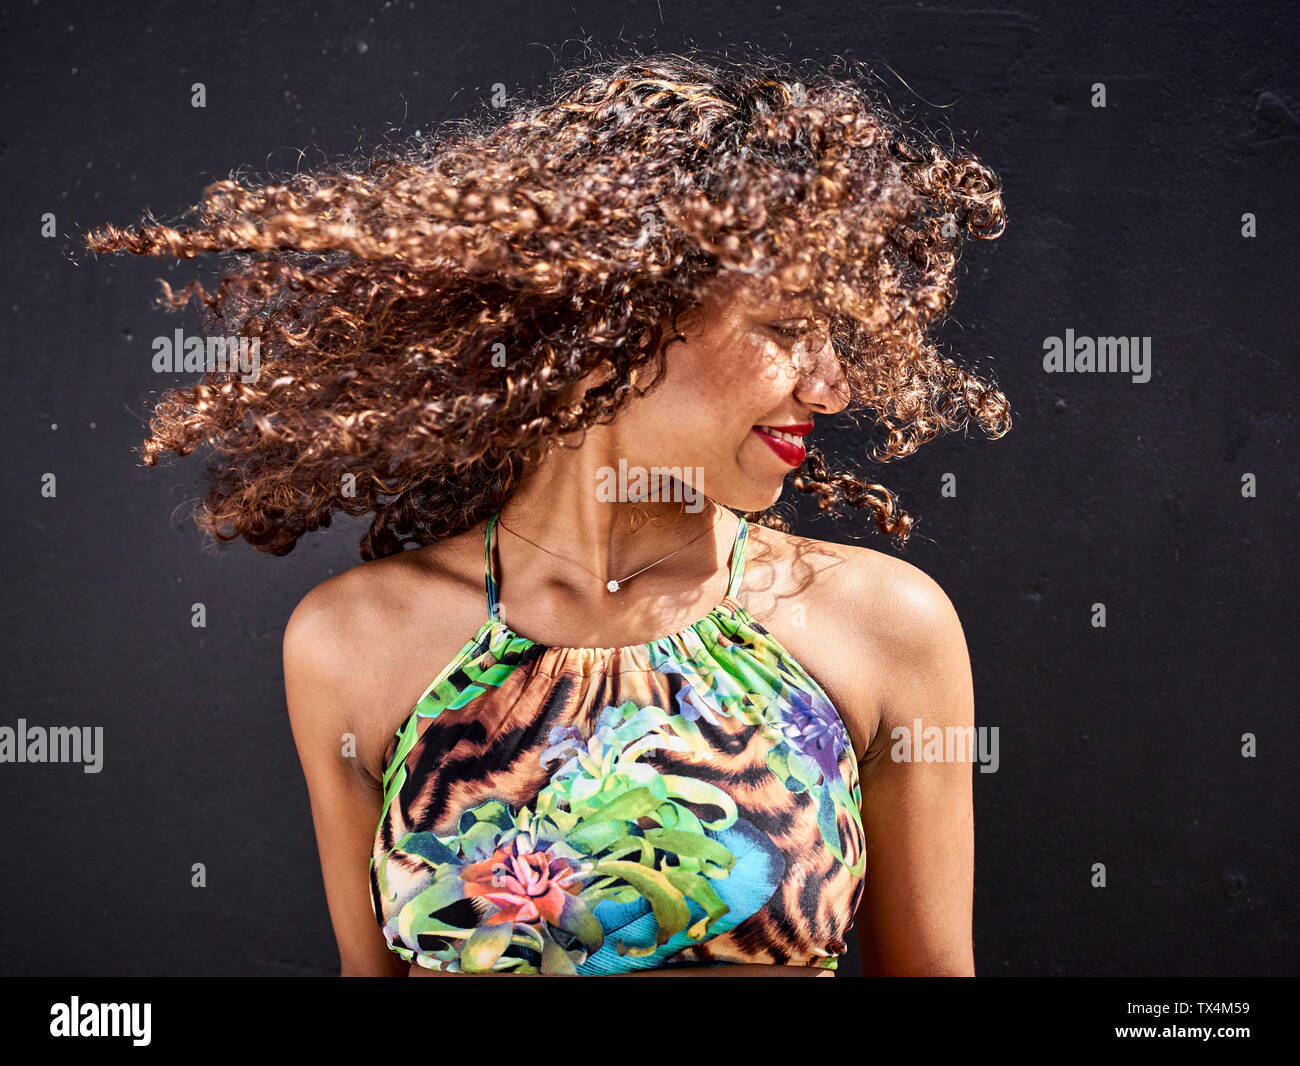 Smiling young woman tossing her curly hair in front of dark background Stock Photo